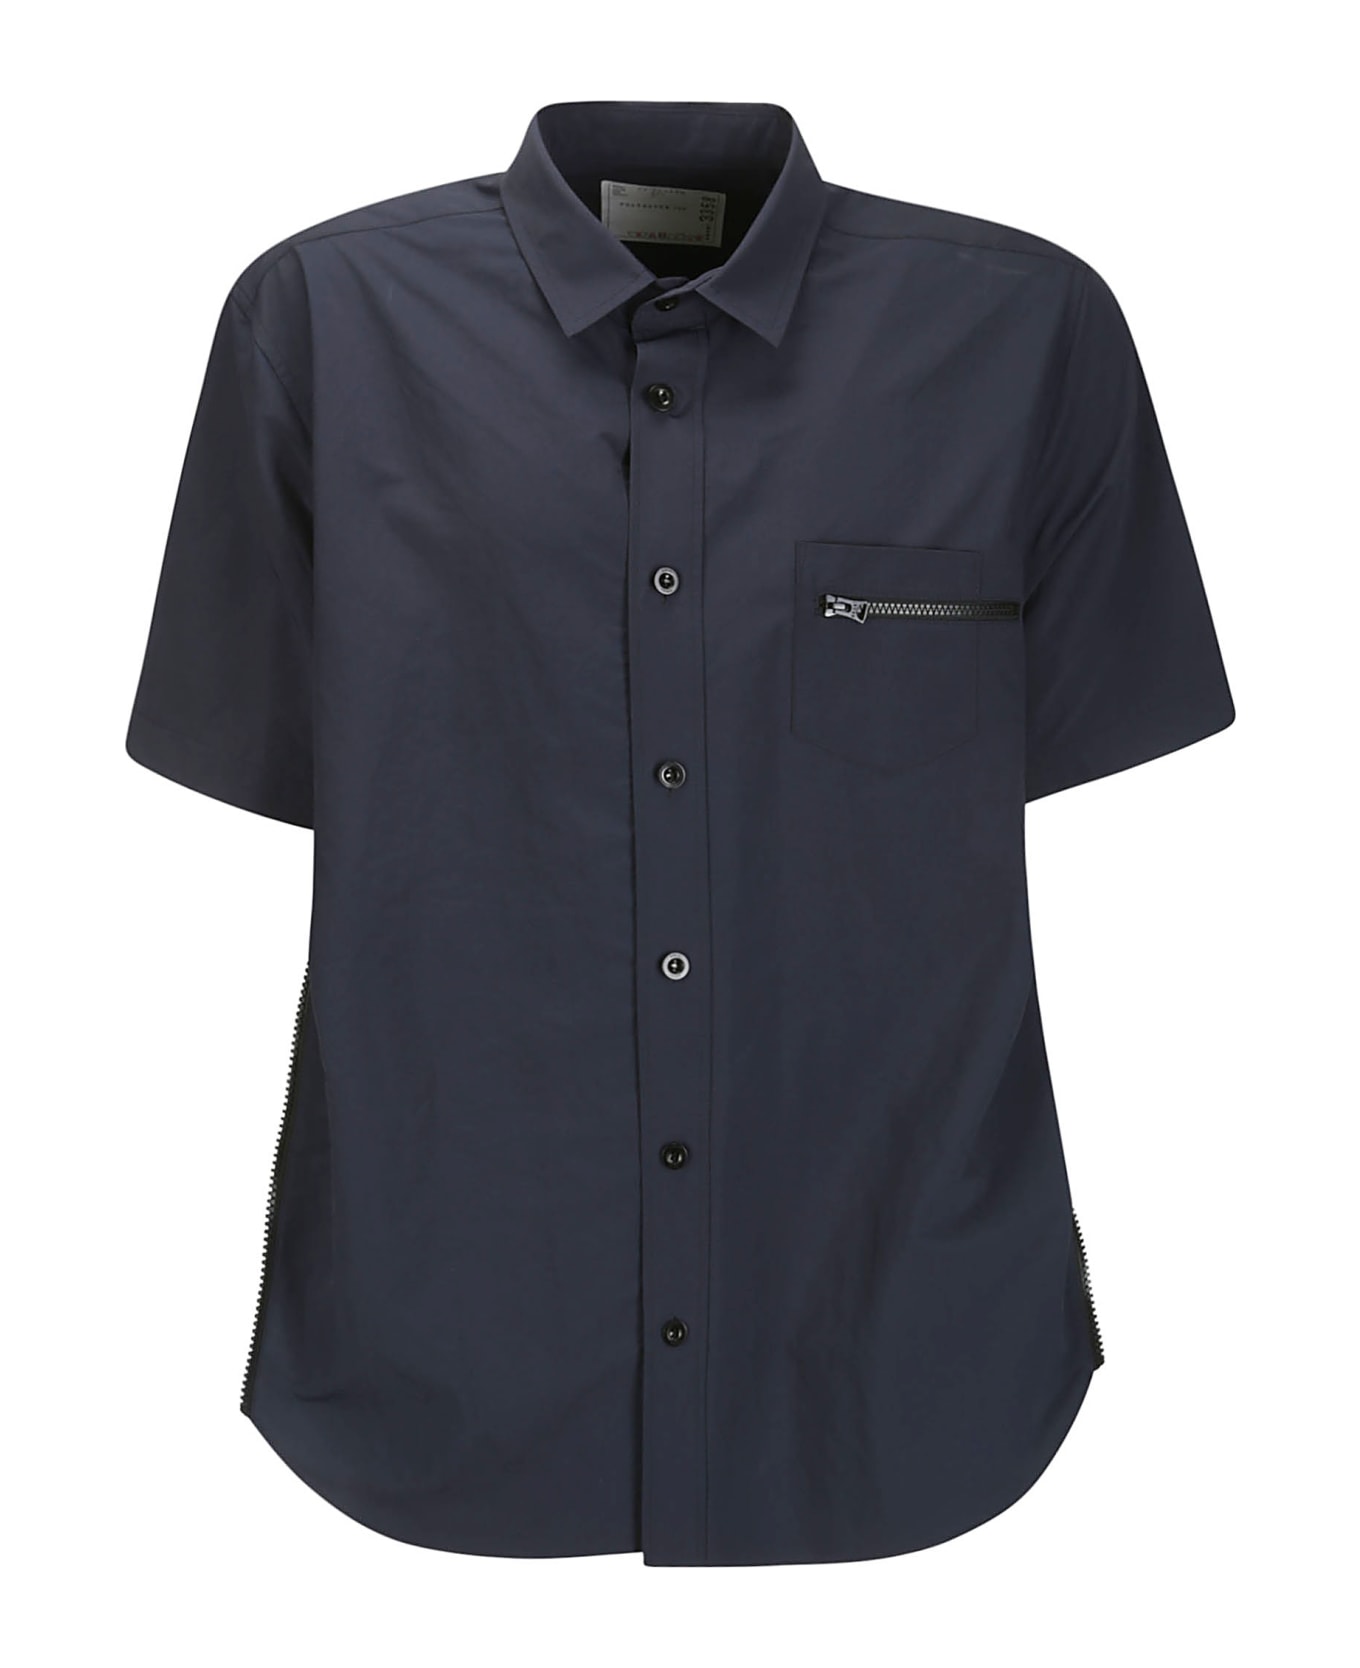 Magliano Pale Twisted Shirt - PALE BLUE 